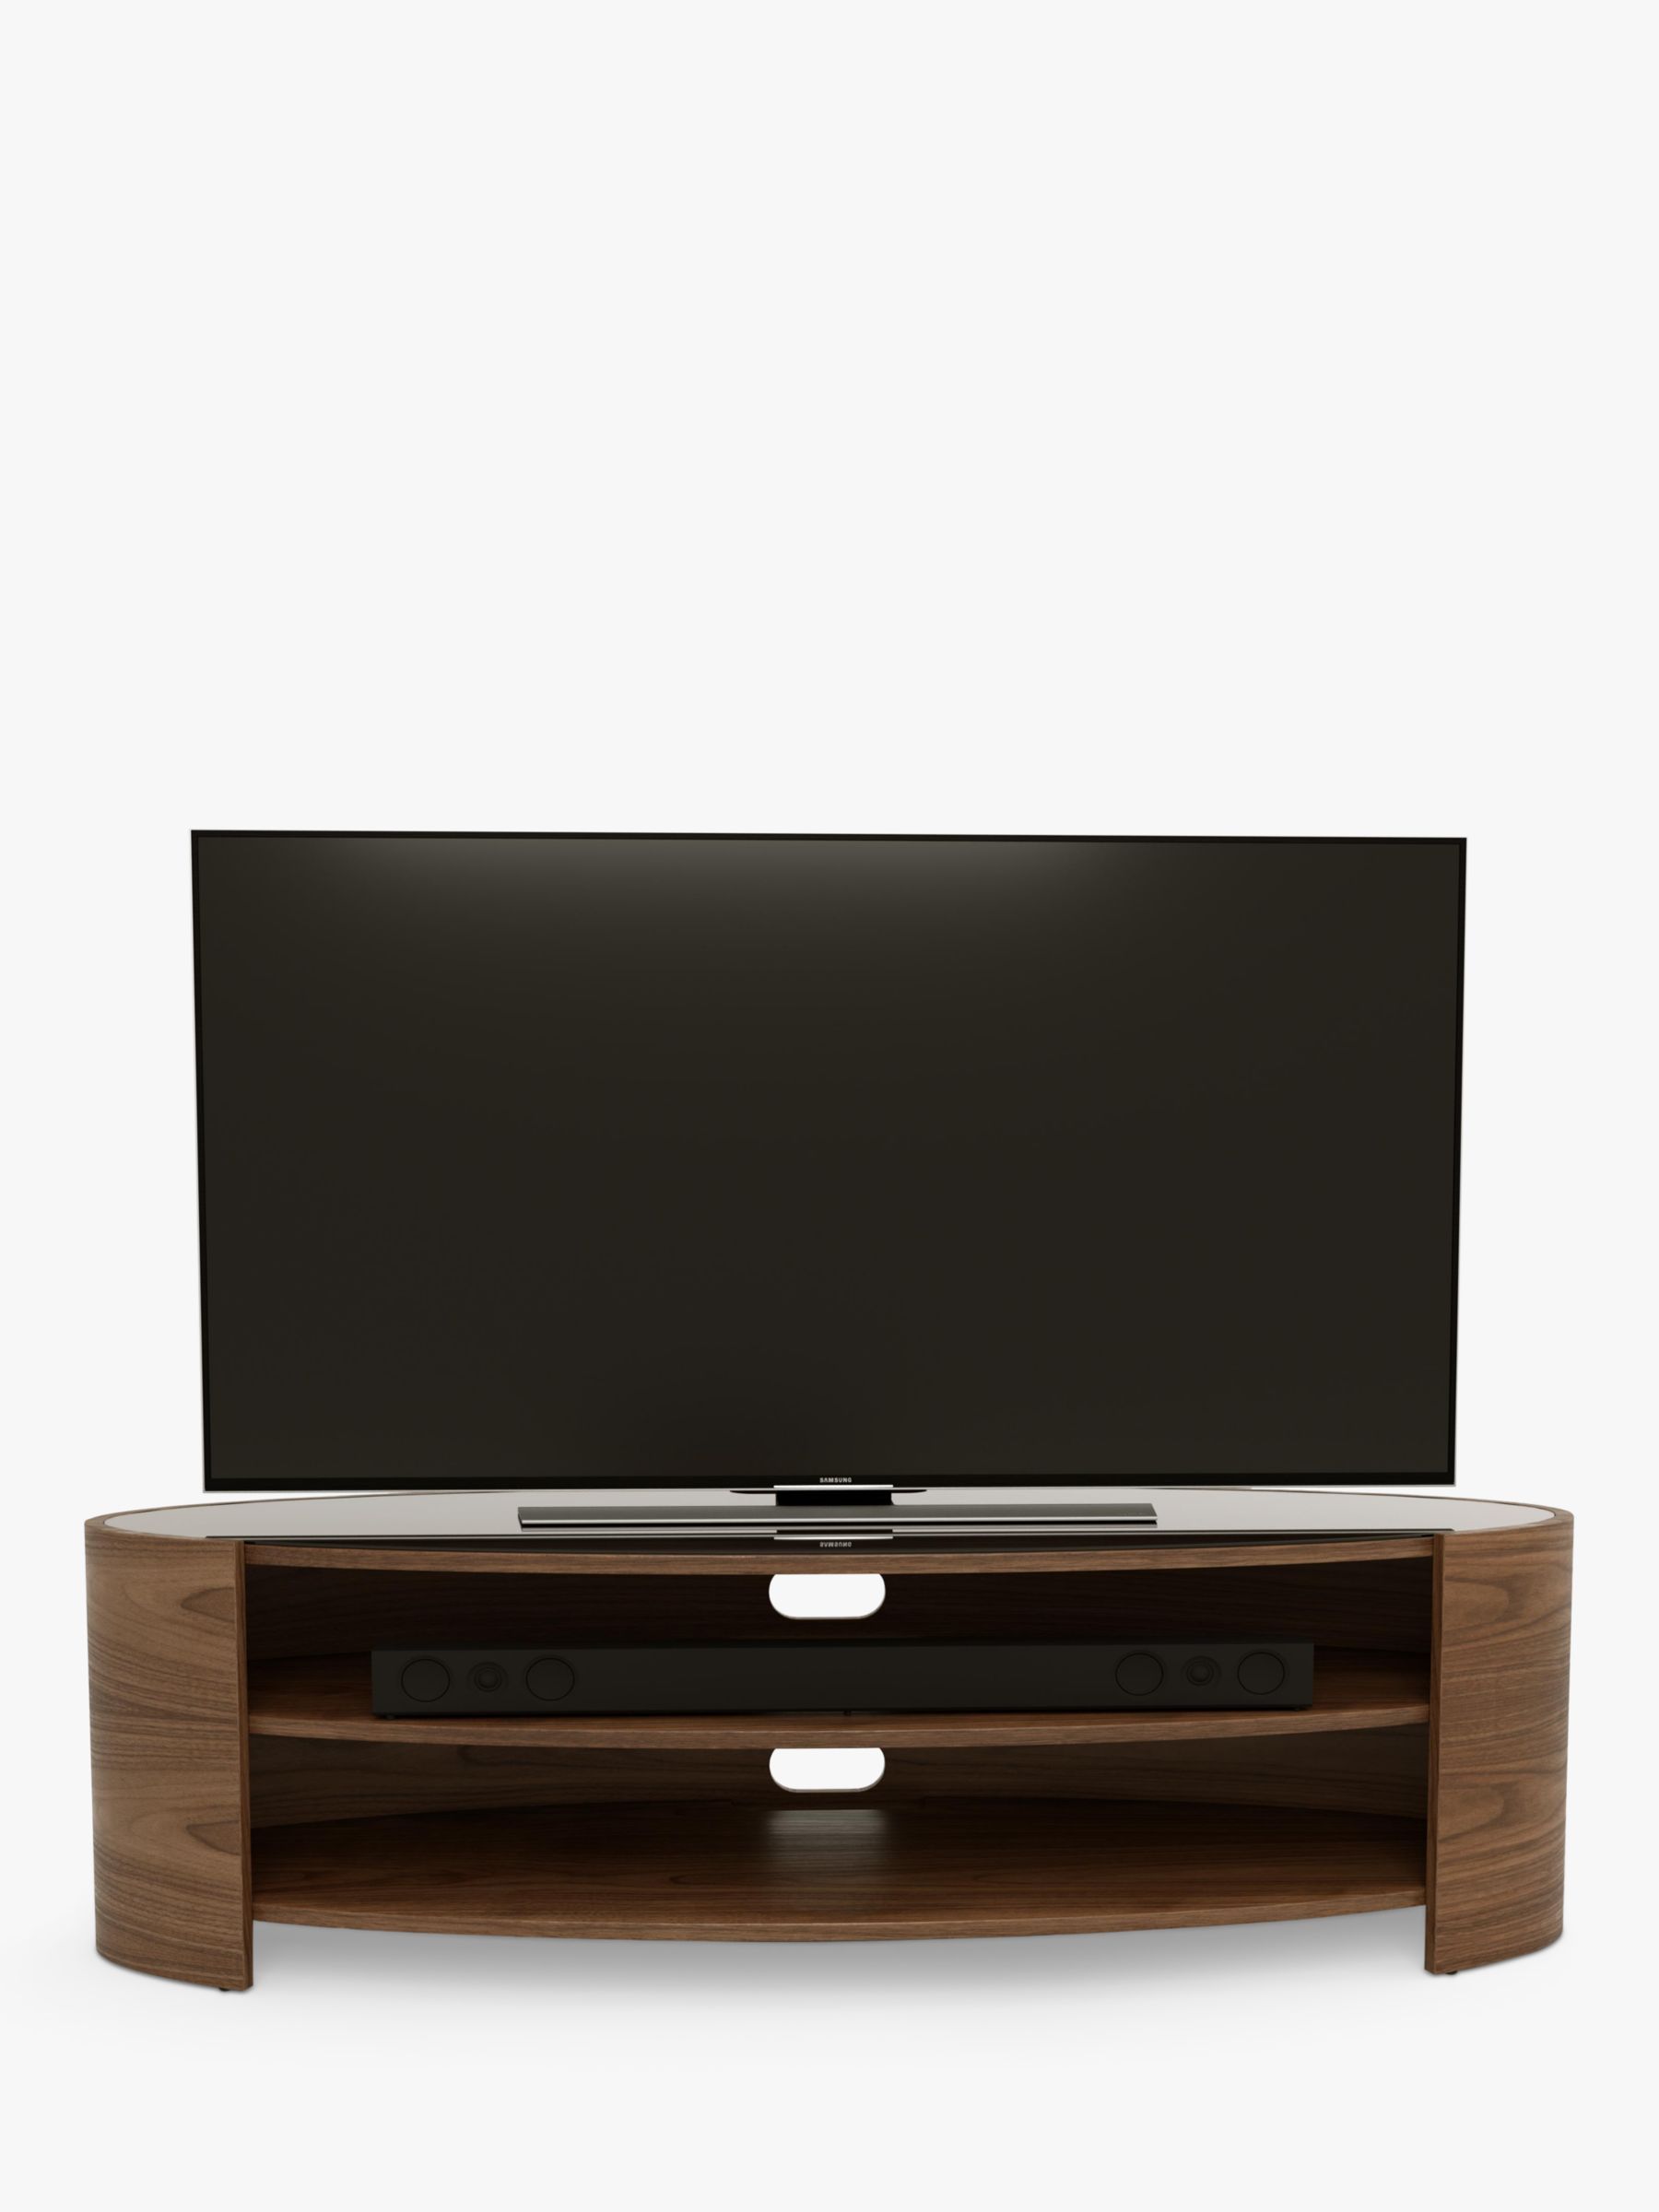 Photo of Tom schneider elliptic deluxe 140 tv stand for tvs up to 60